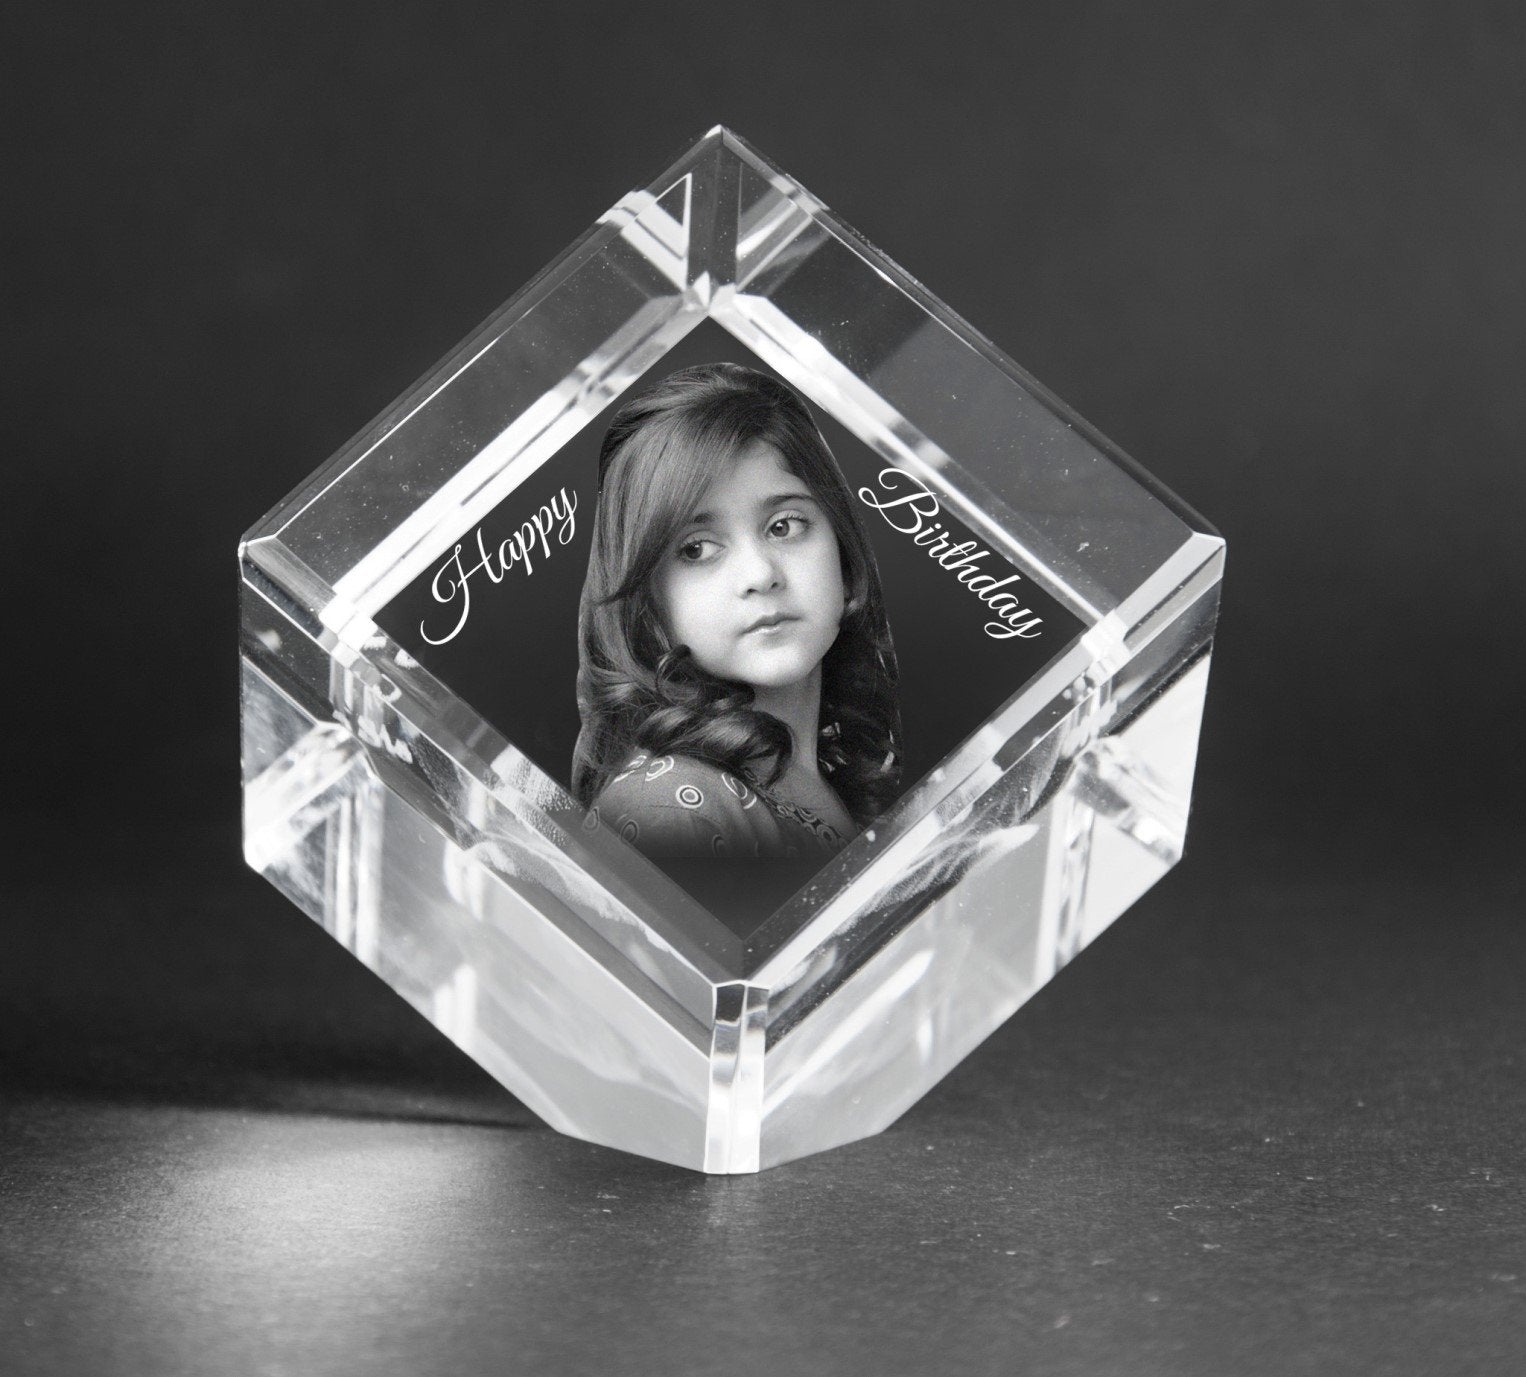 3D Crystal Photo Gifts Online 3D Crystal Gifts Photo on Glass India   Zestpics